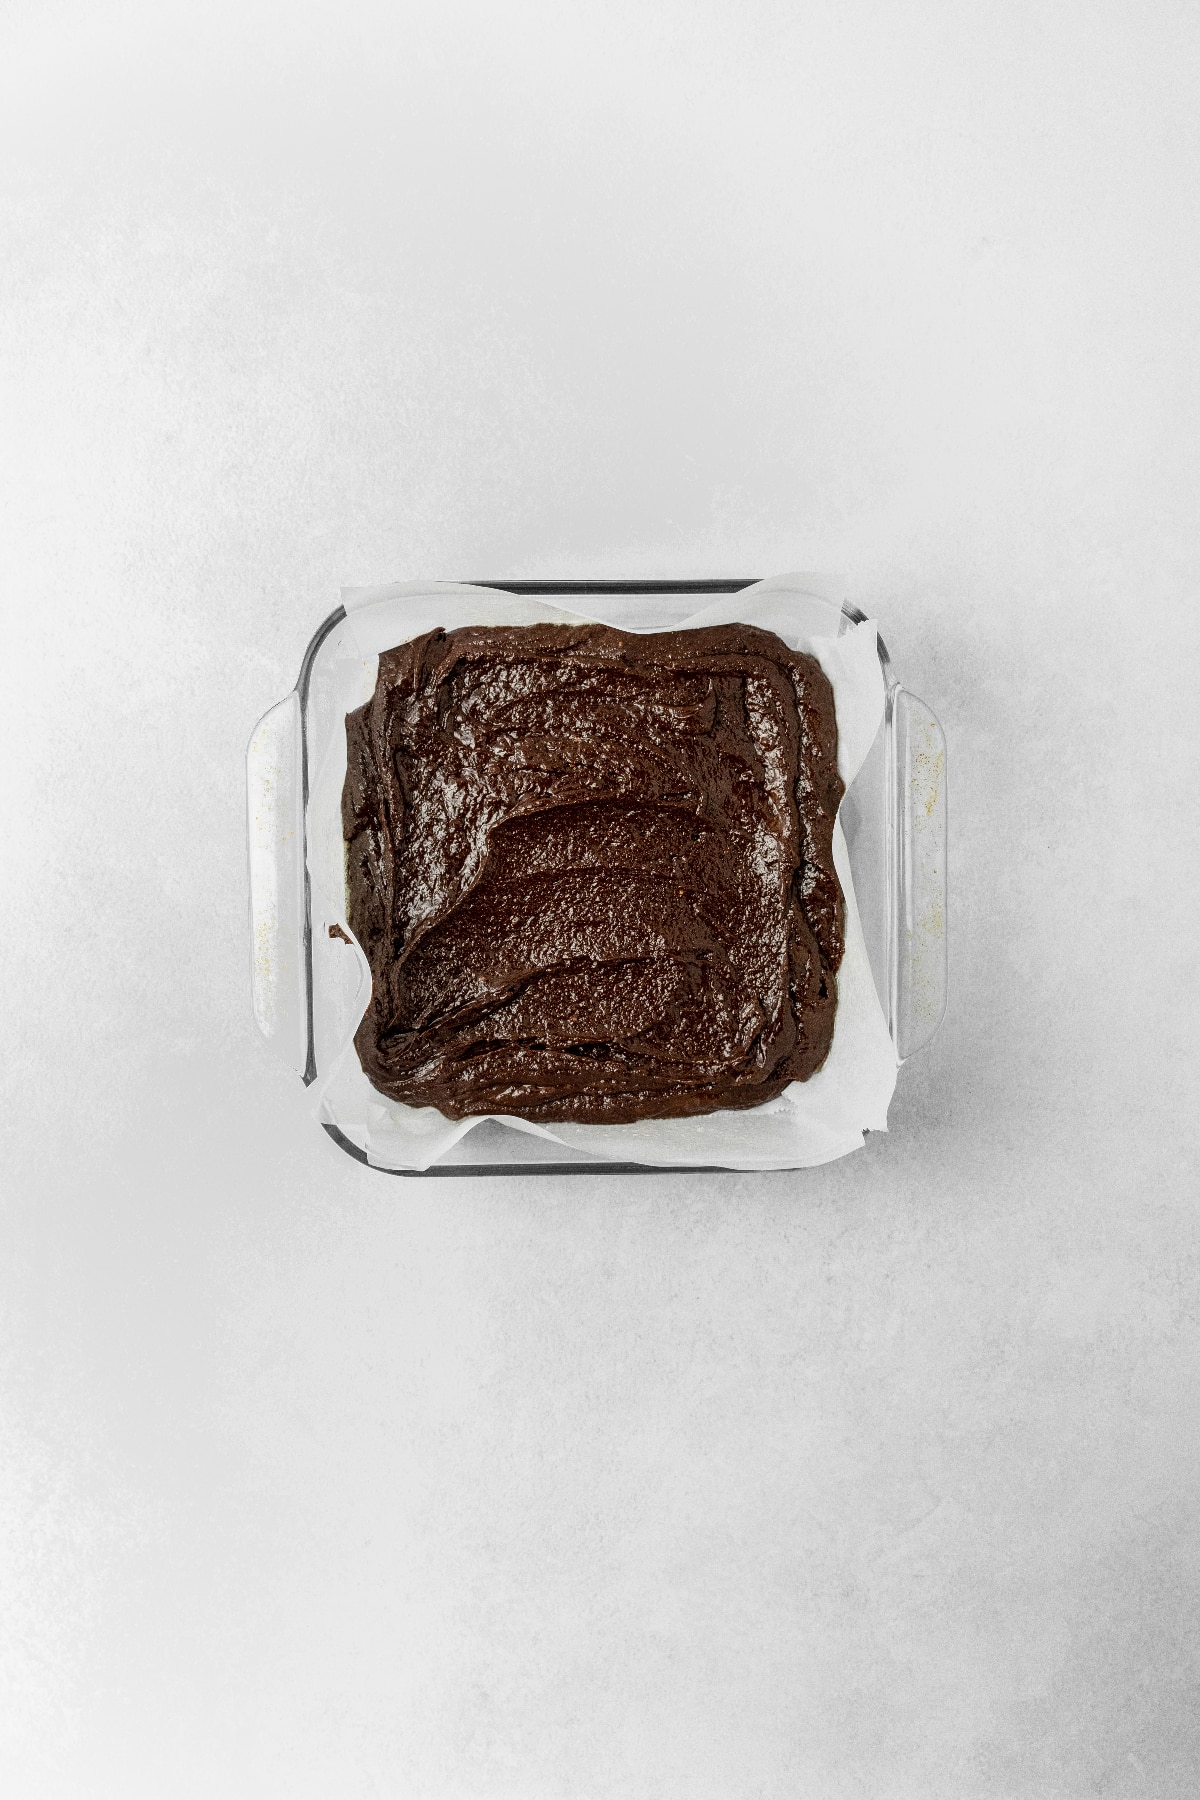 Brownies in a square pan ready to bake.